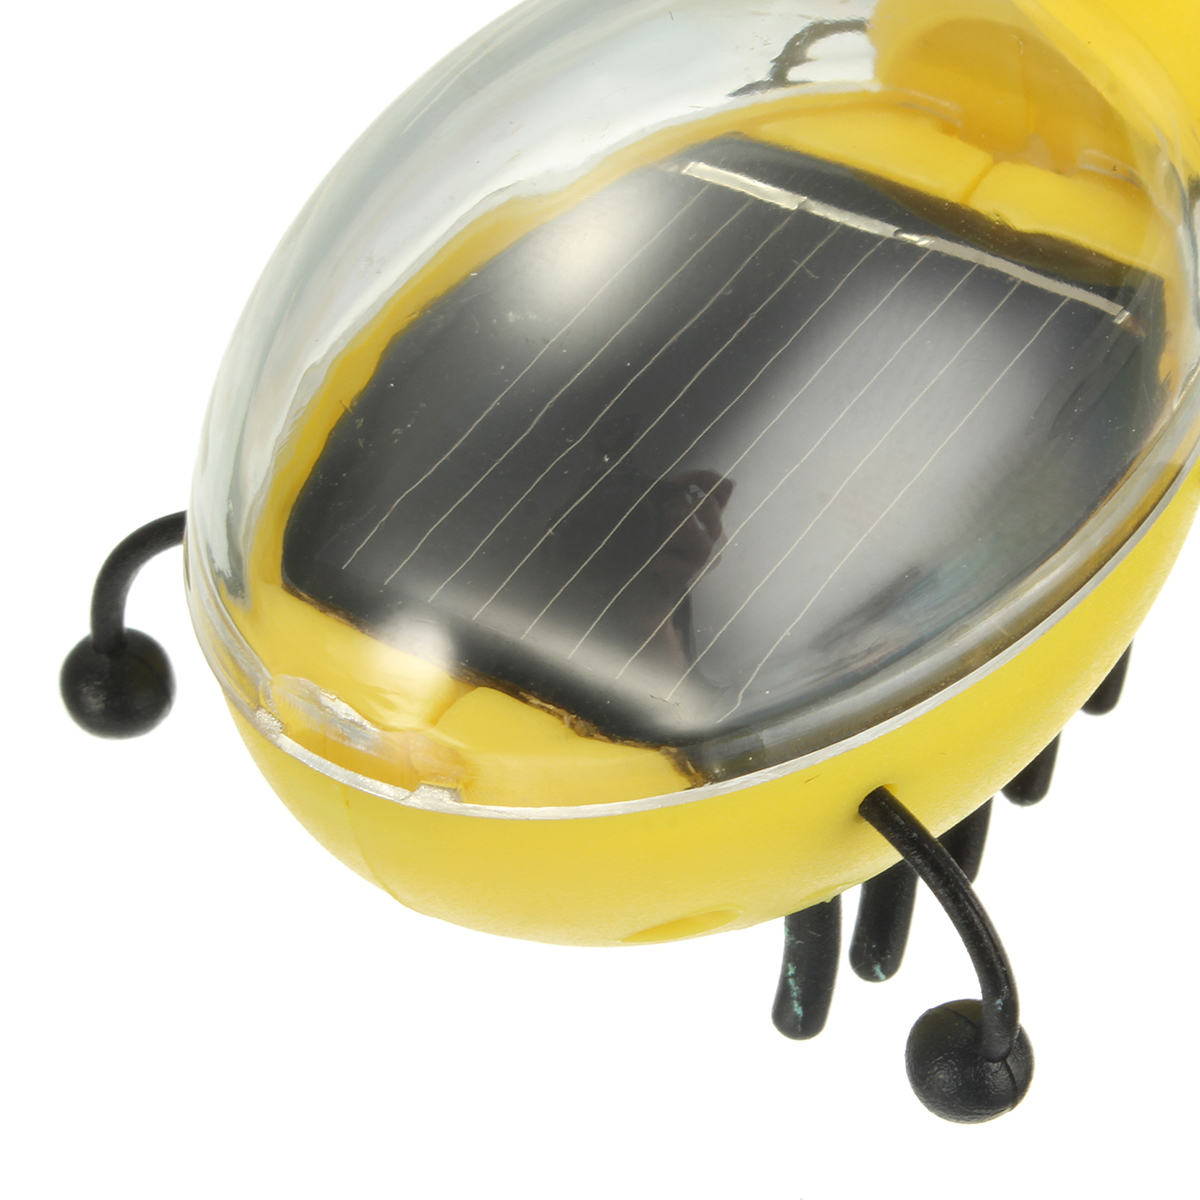 Educational-Solar-Powered-Bee-Ant-Robot-Toy-Gadget-Gift-1965213-3